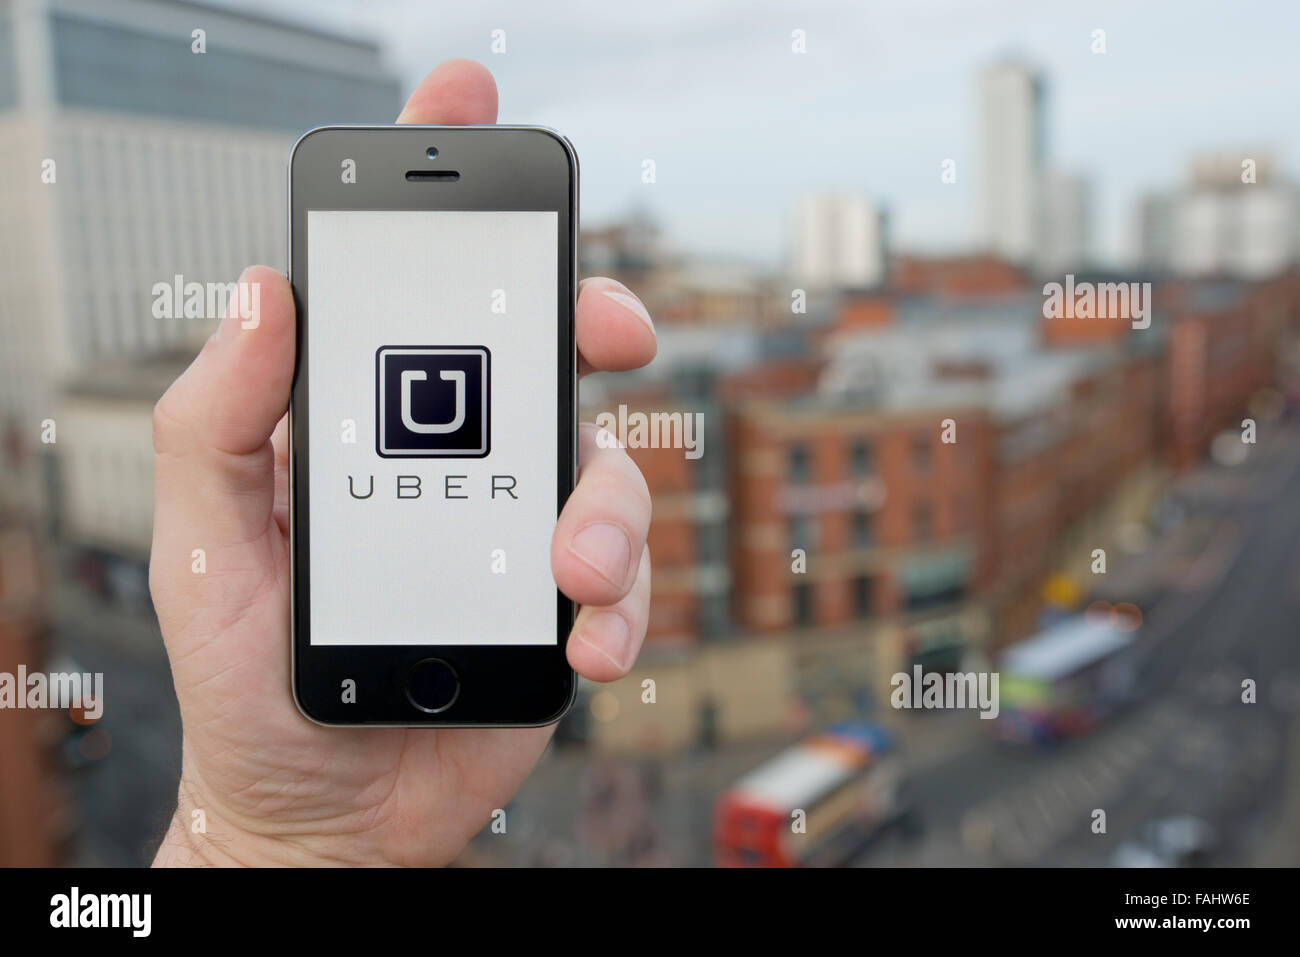 A man uses the Uber taxi smartphone app while stood in a tall building overlooking a busy city street (Editorial use only) Stock Photo